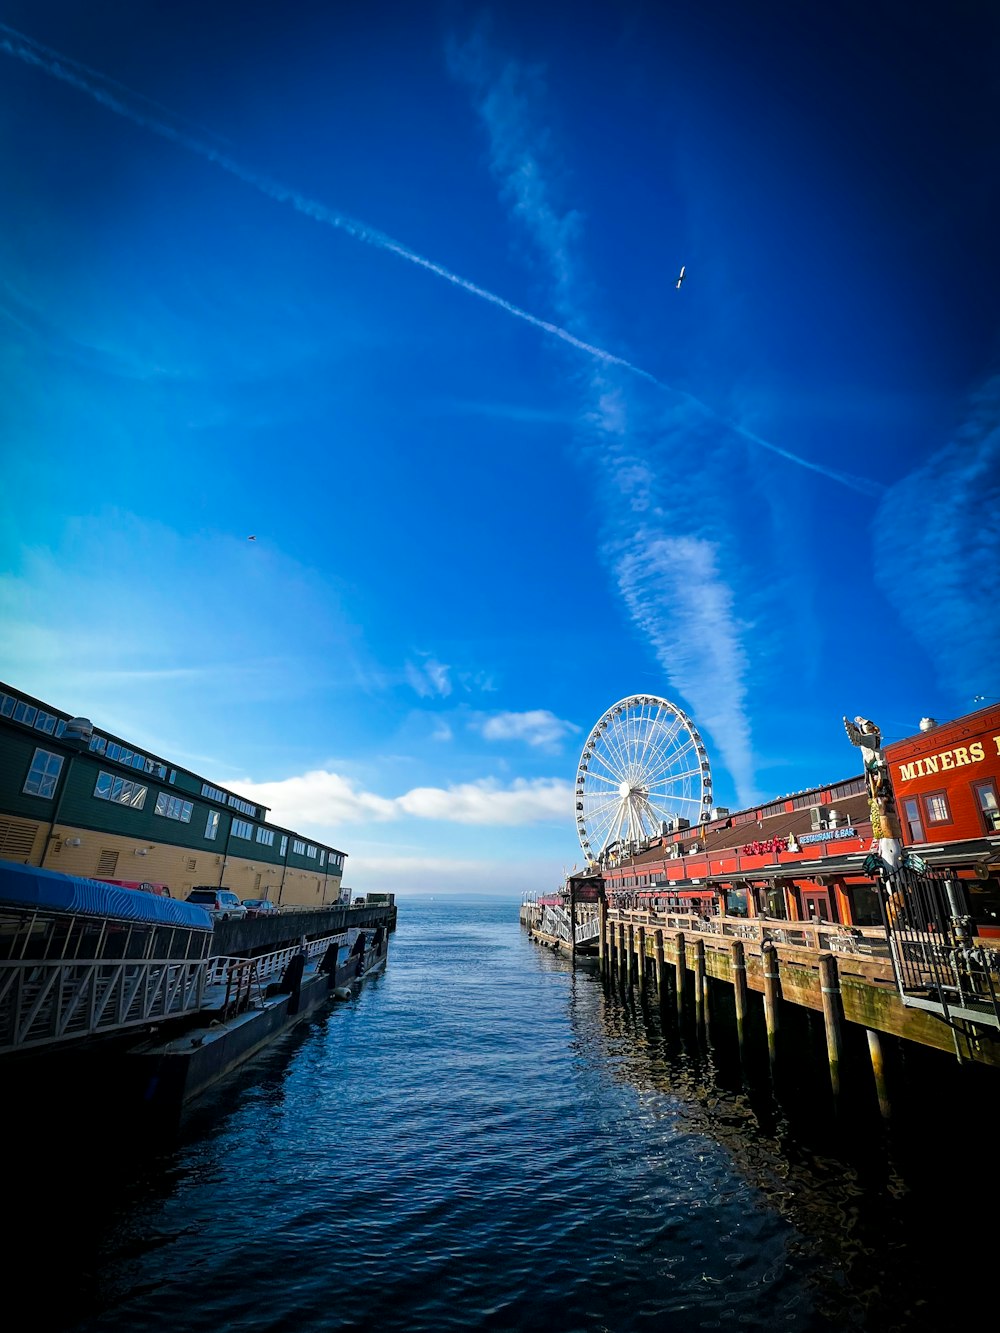 a pier with a ferris wheel and a ferris wheel in the distance